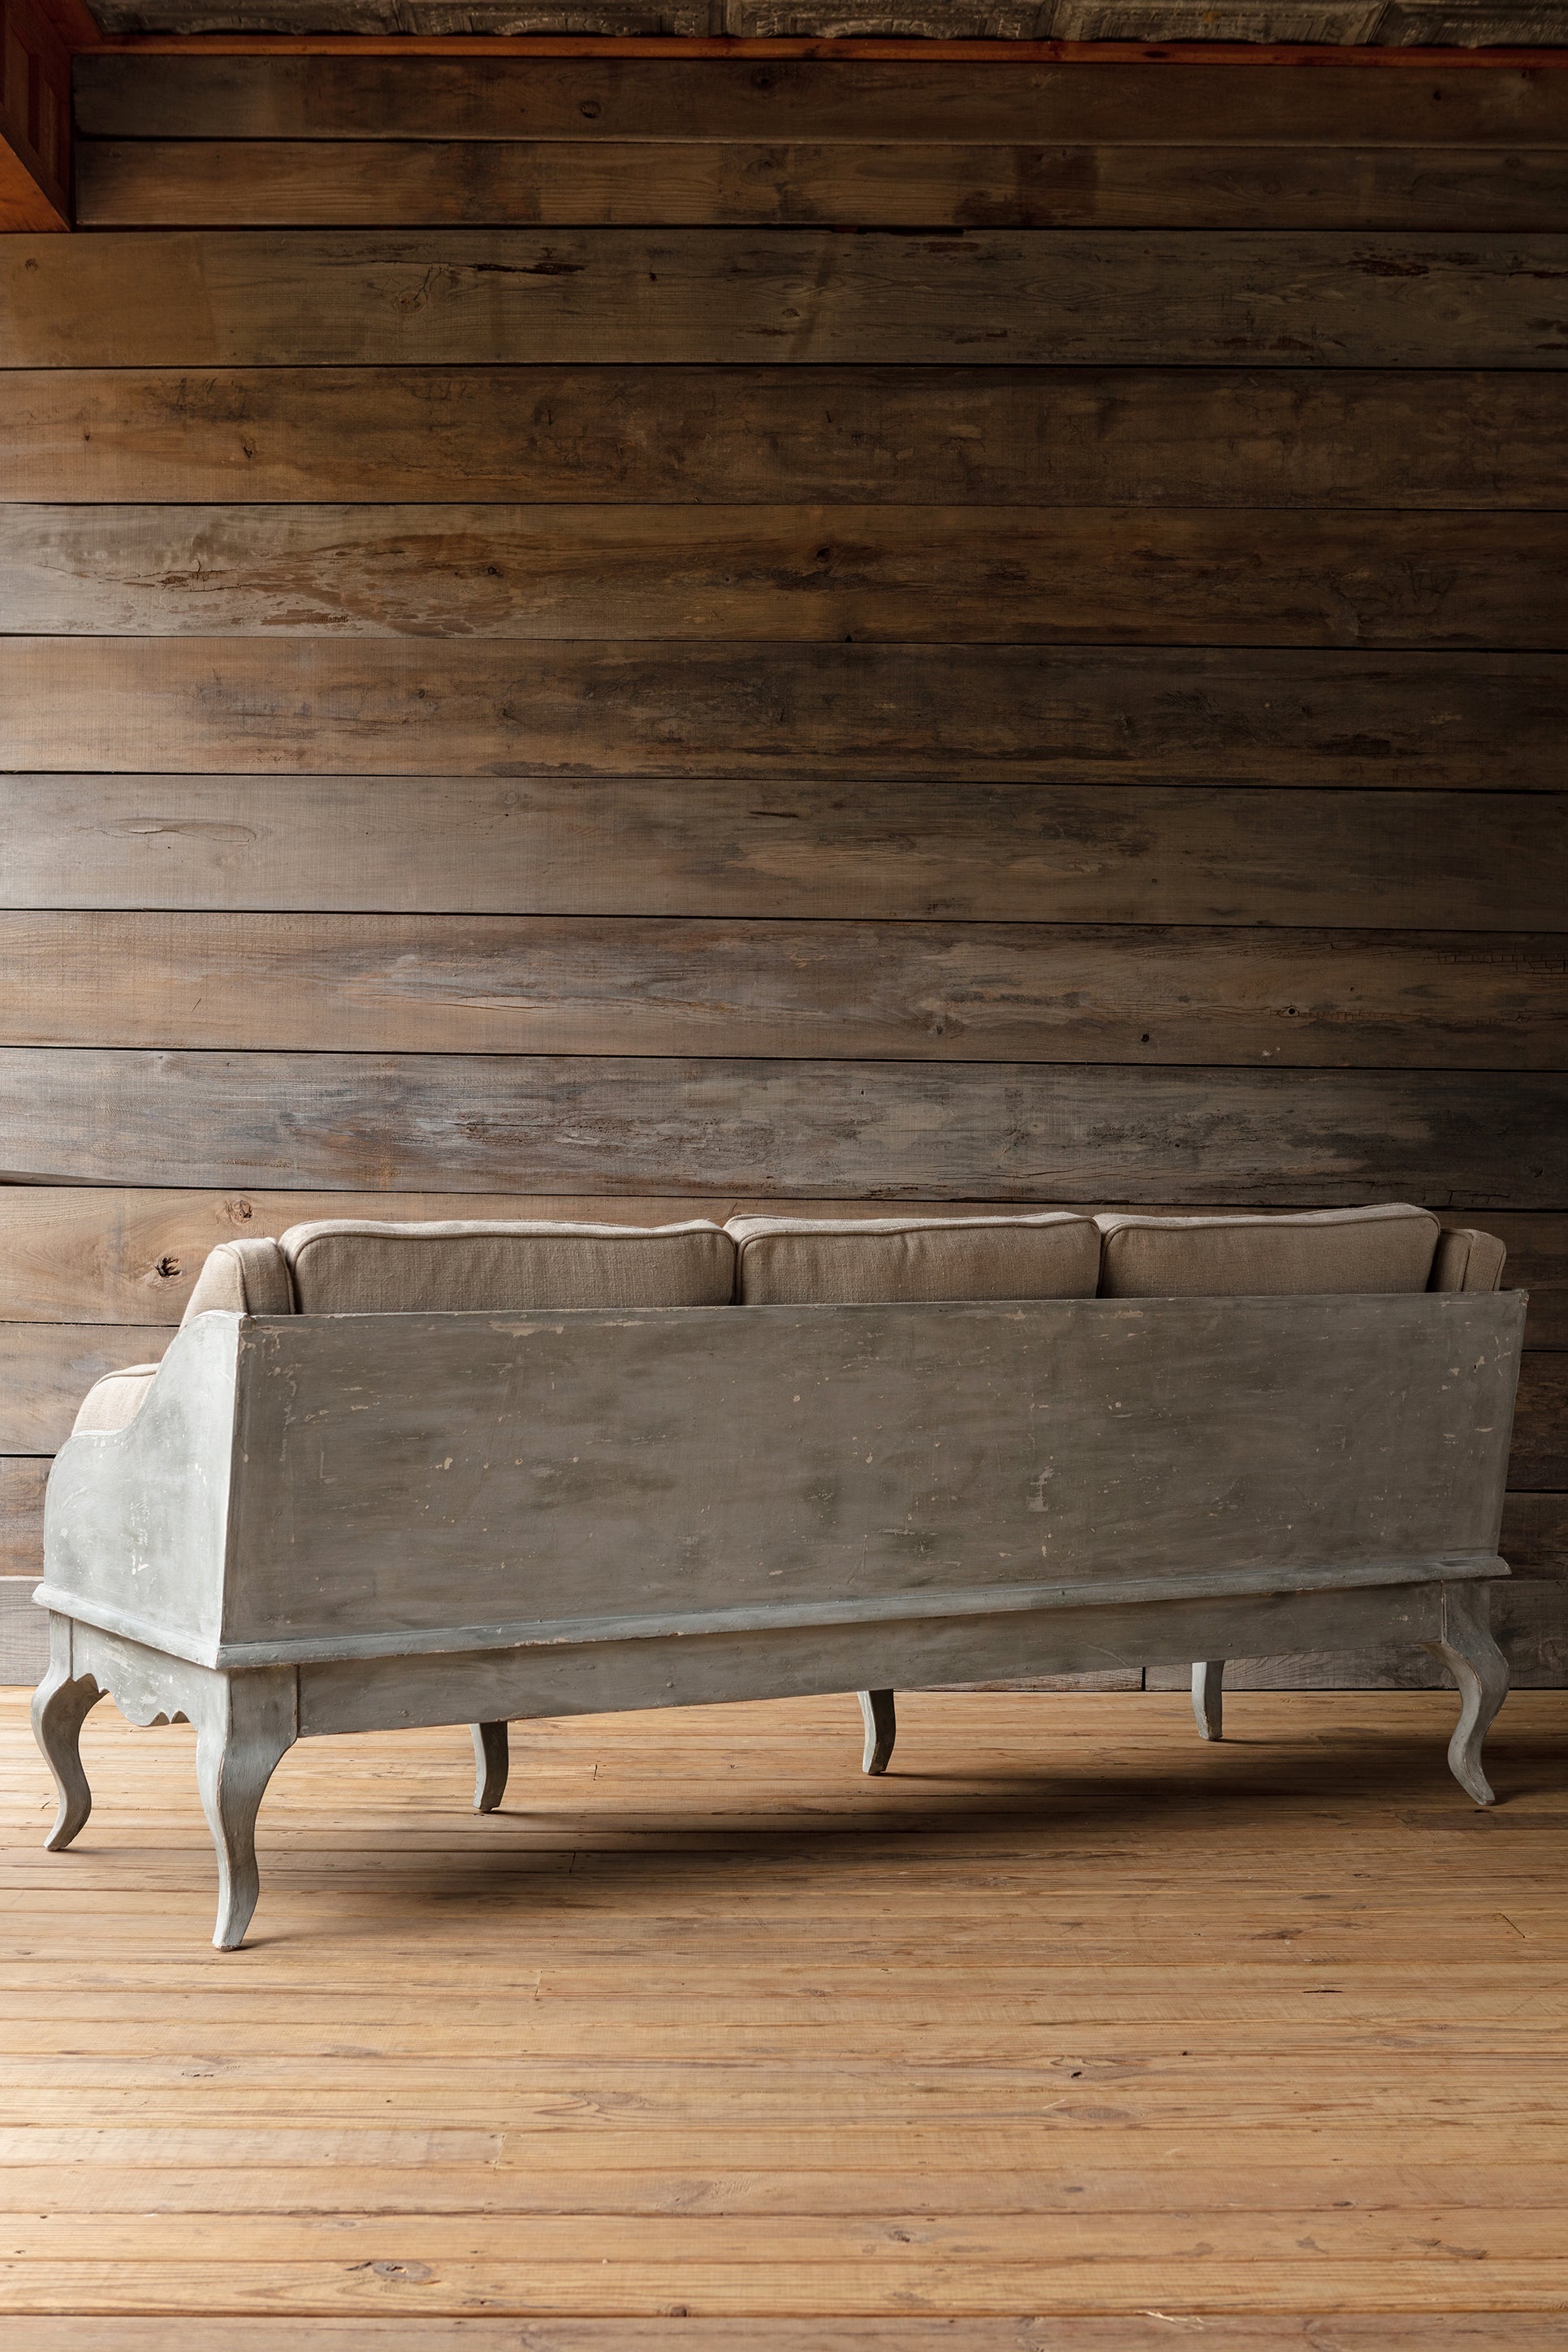 Park Hill French Country sofa for sale, Restoration Hardware French Sofa for sale